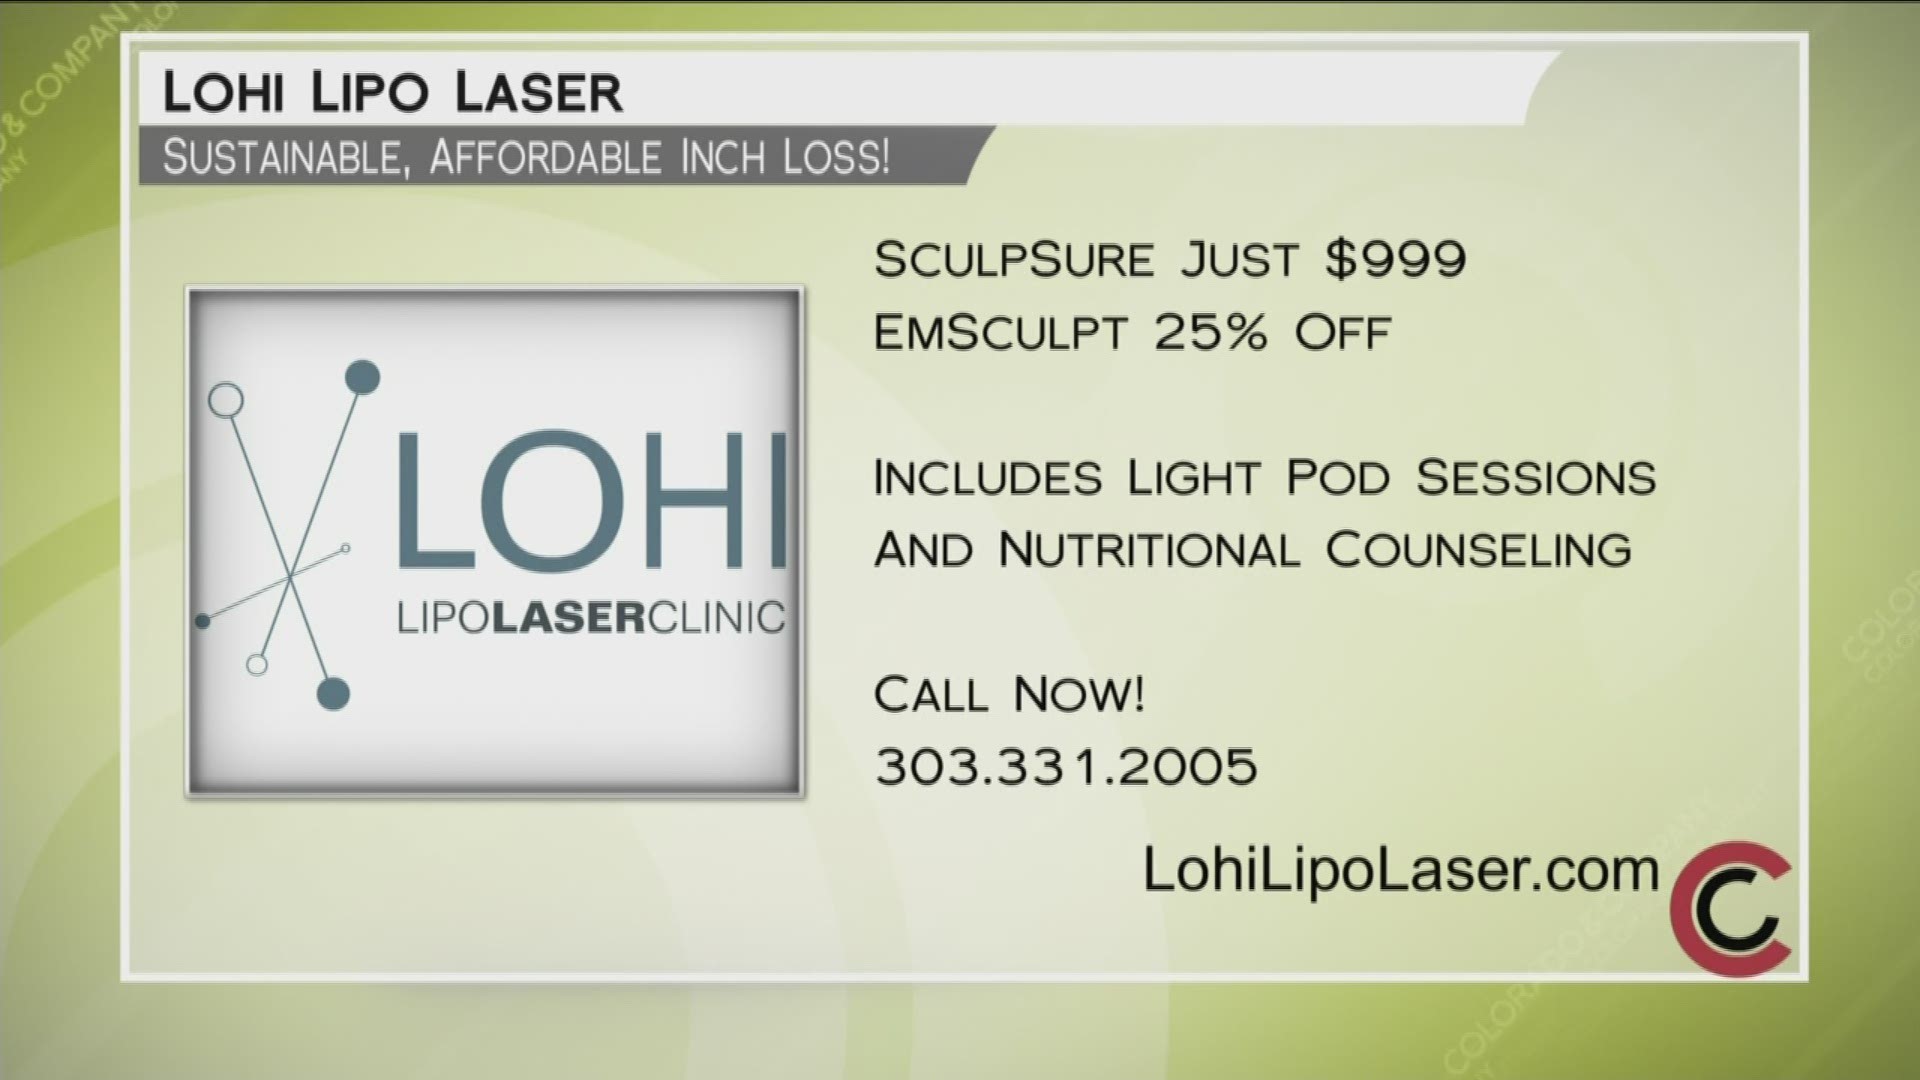 Lohi Lipo Laser has a treatment that's right for you. Em-Sculpt is on special at 25% off! Call right now, 303-331-2005. Check out their reviews at LohiLipoLaser.com.